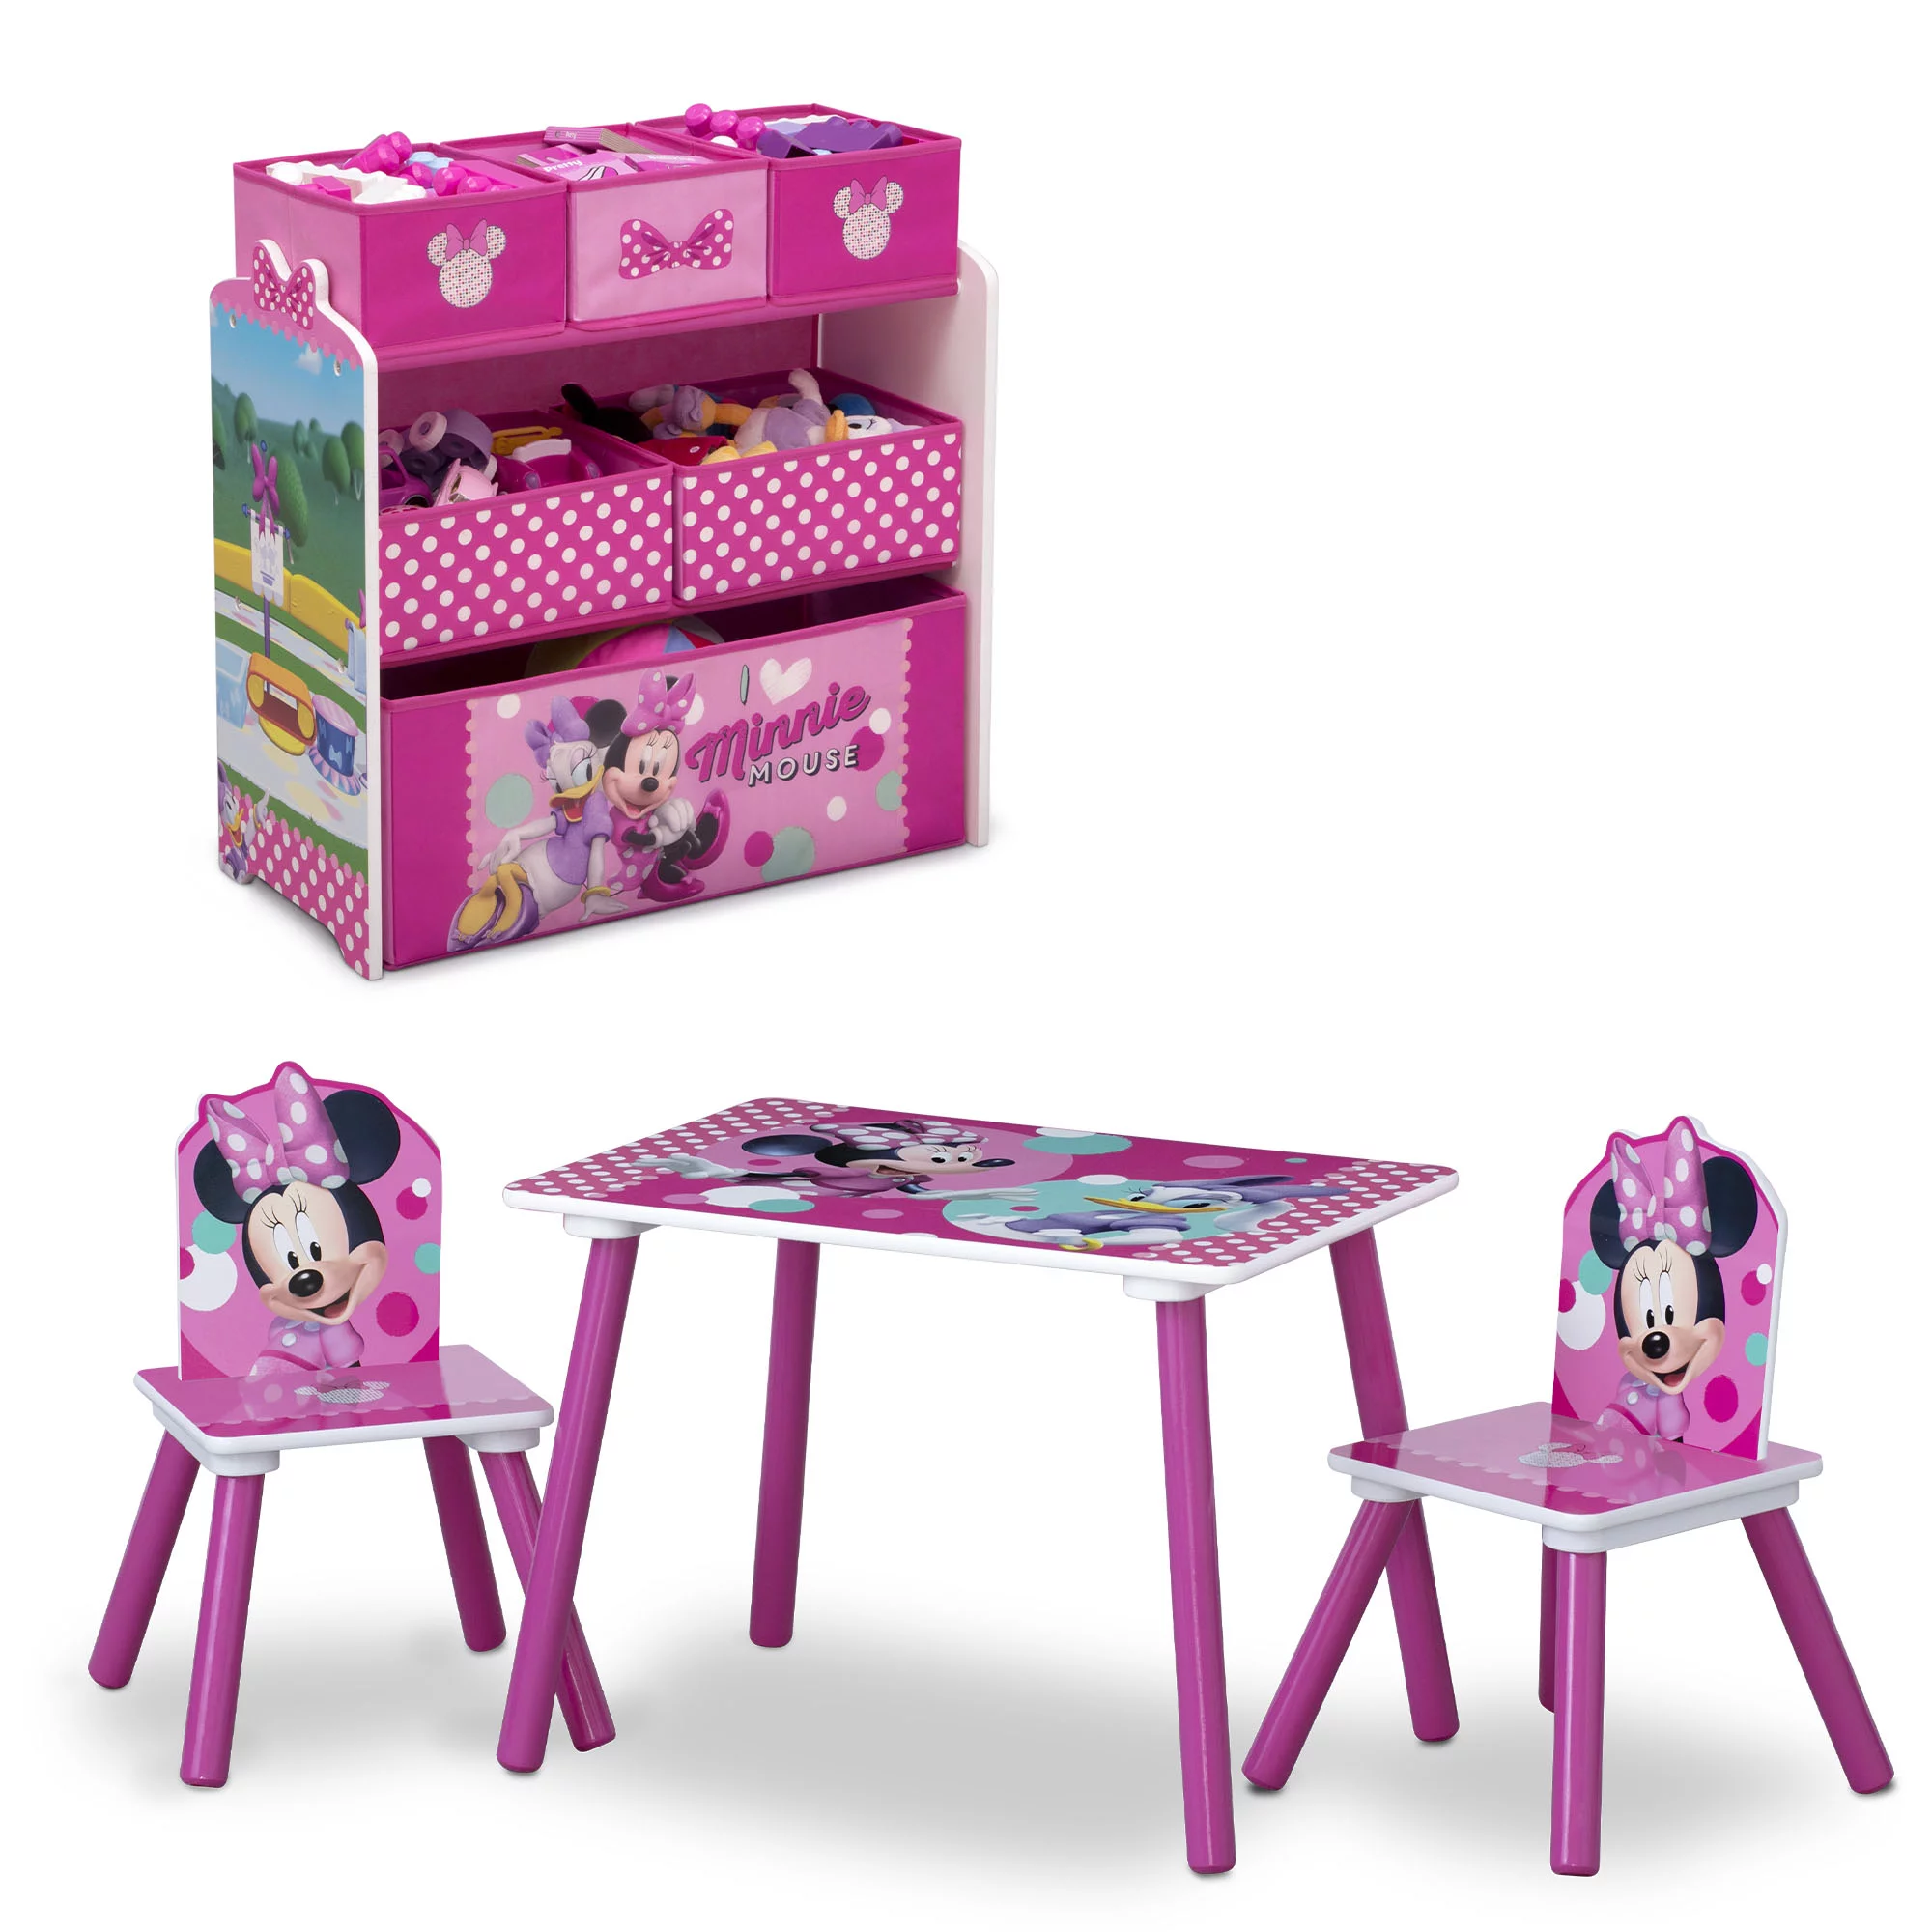 Minnie Mouse 4-Piece Wood Toddler Playroom Set  Includes Table, 2 Chairs & Toy Bin, Pink